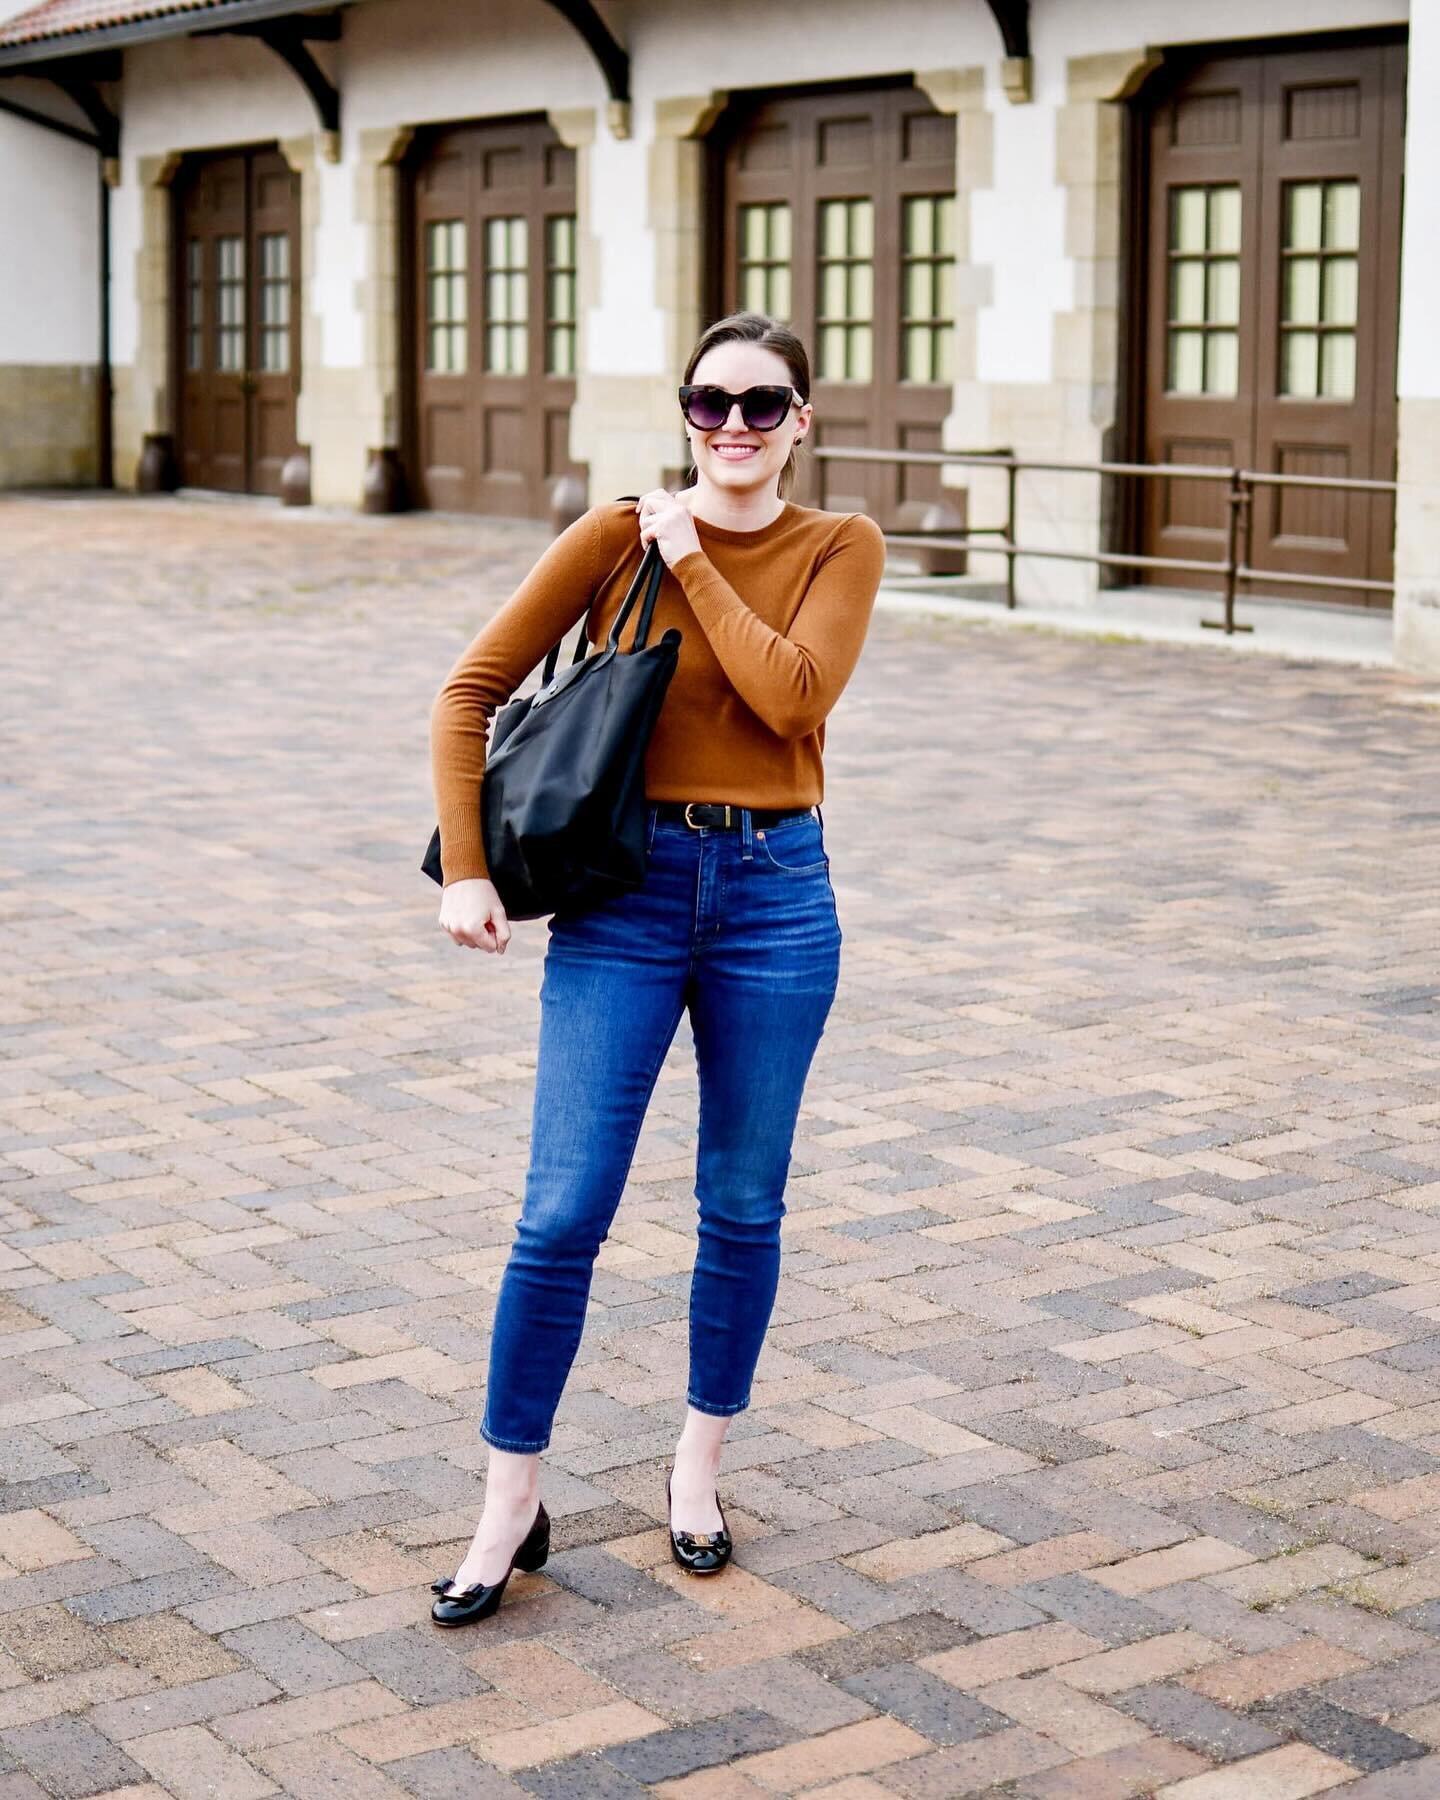 I&rsquo;m getting back to my roots: grad school! Did you know I started blogging over 10 years ago when I was in grad school? It feels like another lifetime ago 😅 My blog started as a style diary, and there&rsquo;s tons of old outfits to peruse!

I 